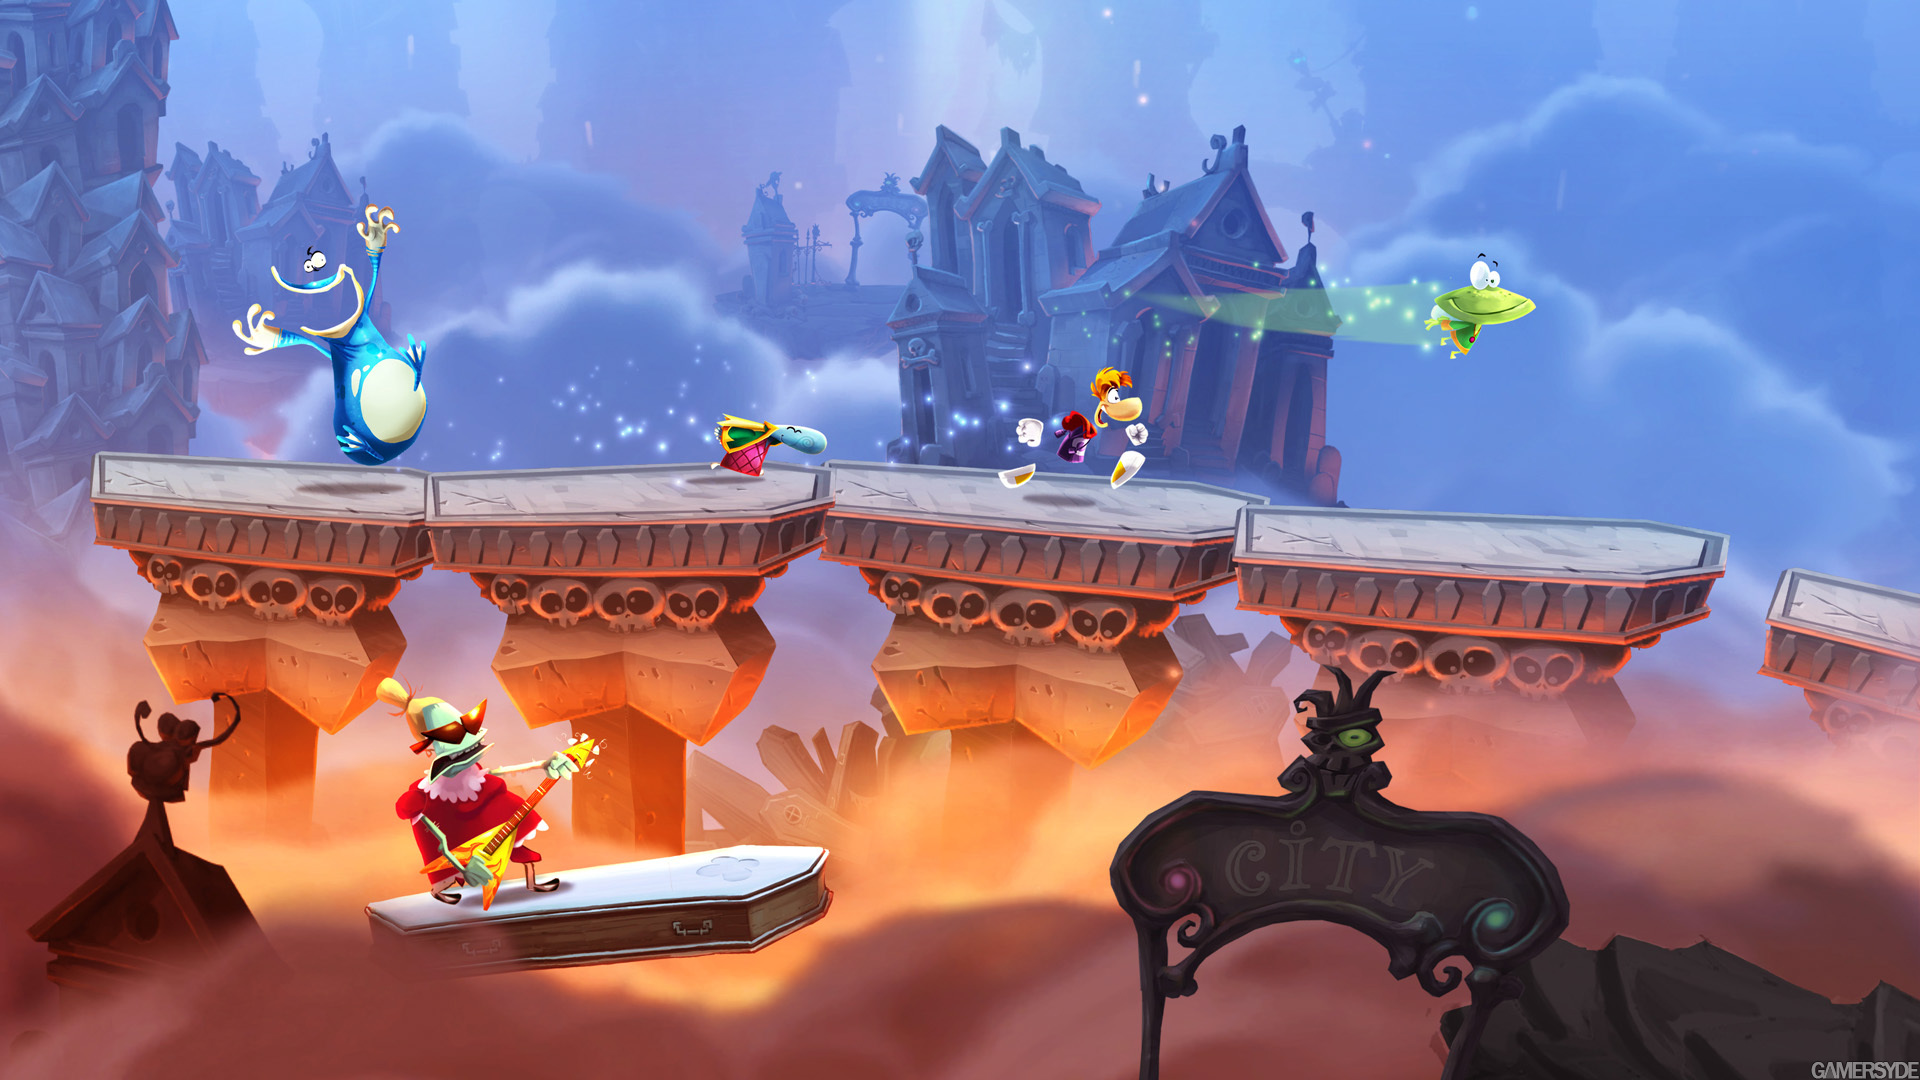 Rayman Legends - Medieval Castle Gameplay - E3 2012 - IGN